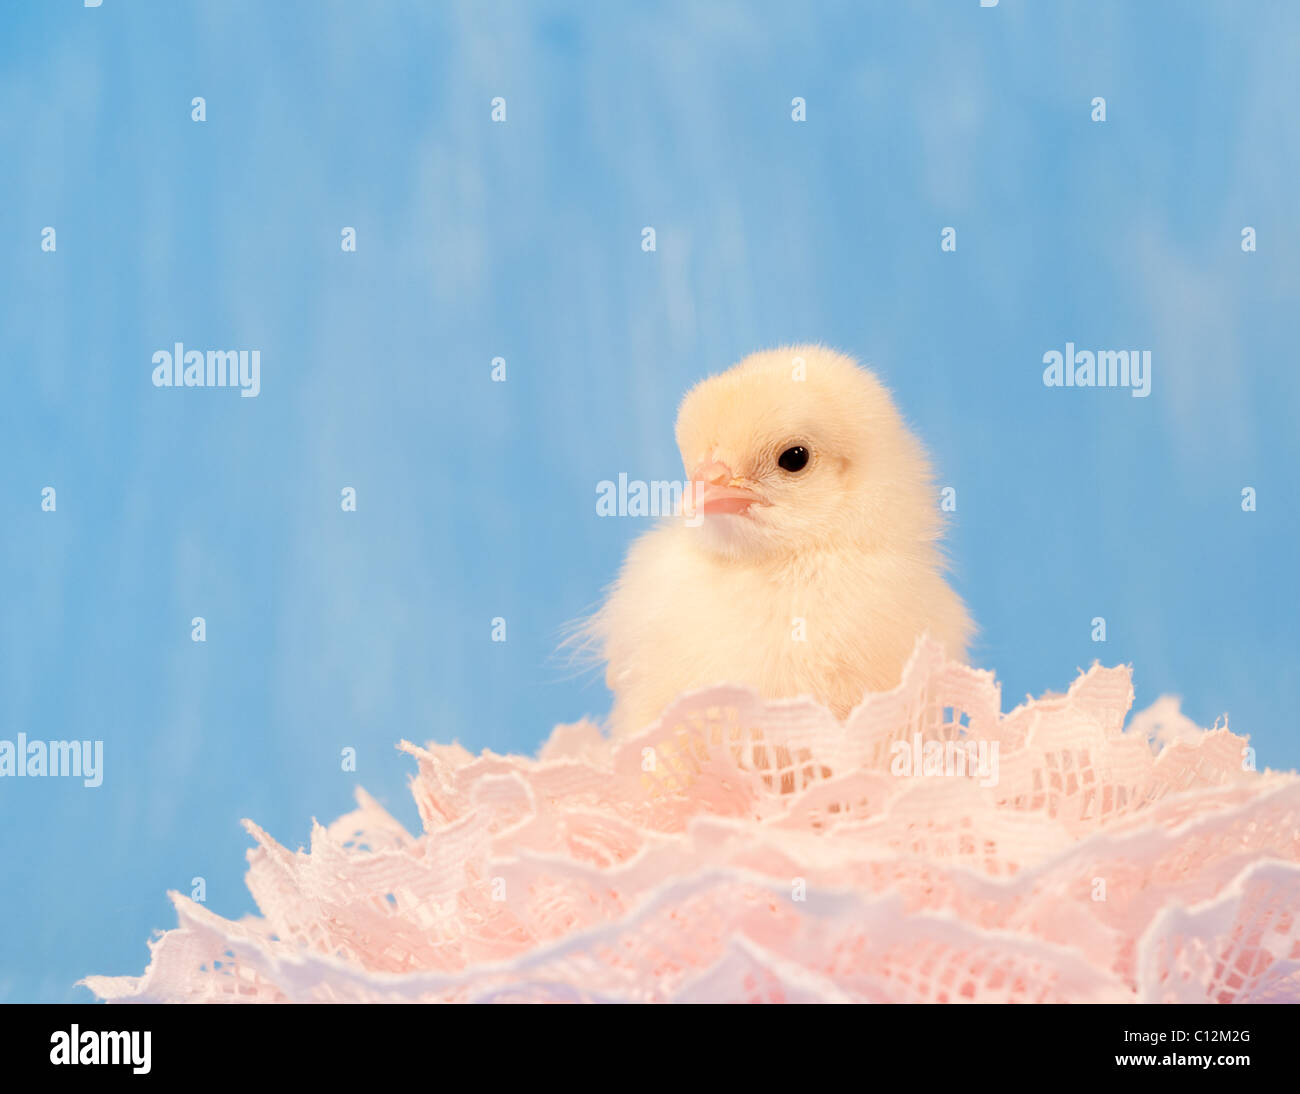 Tiny yellow Easter chick nested in pink lace, against painted blue background with copy space Stock Photo